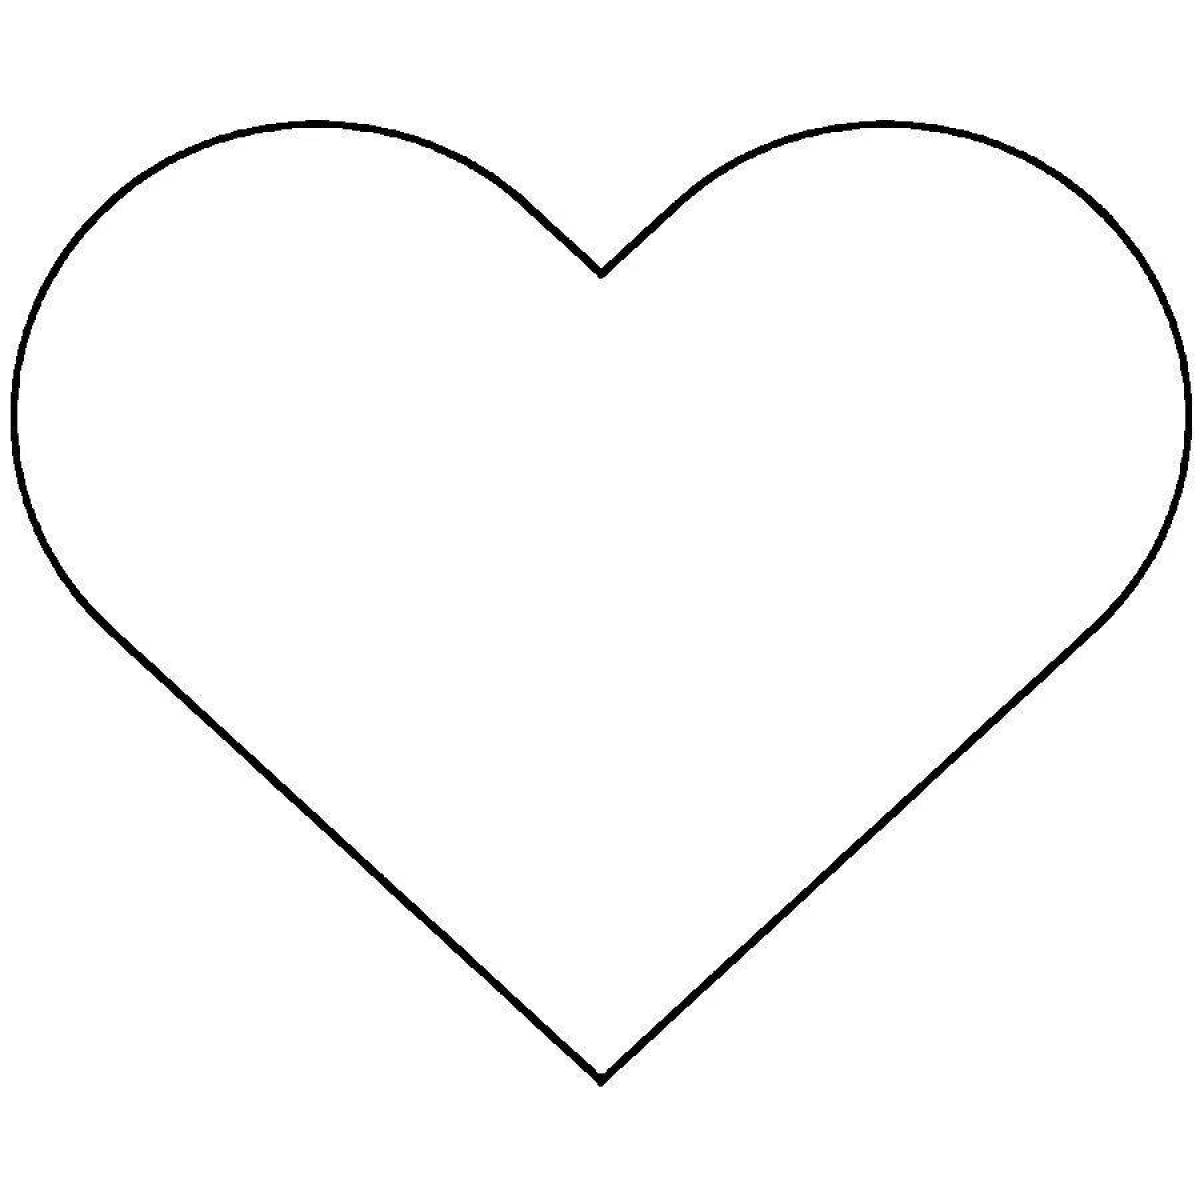 Coloring page charming card heart